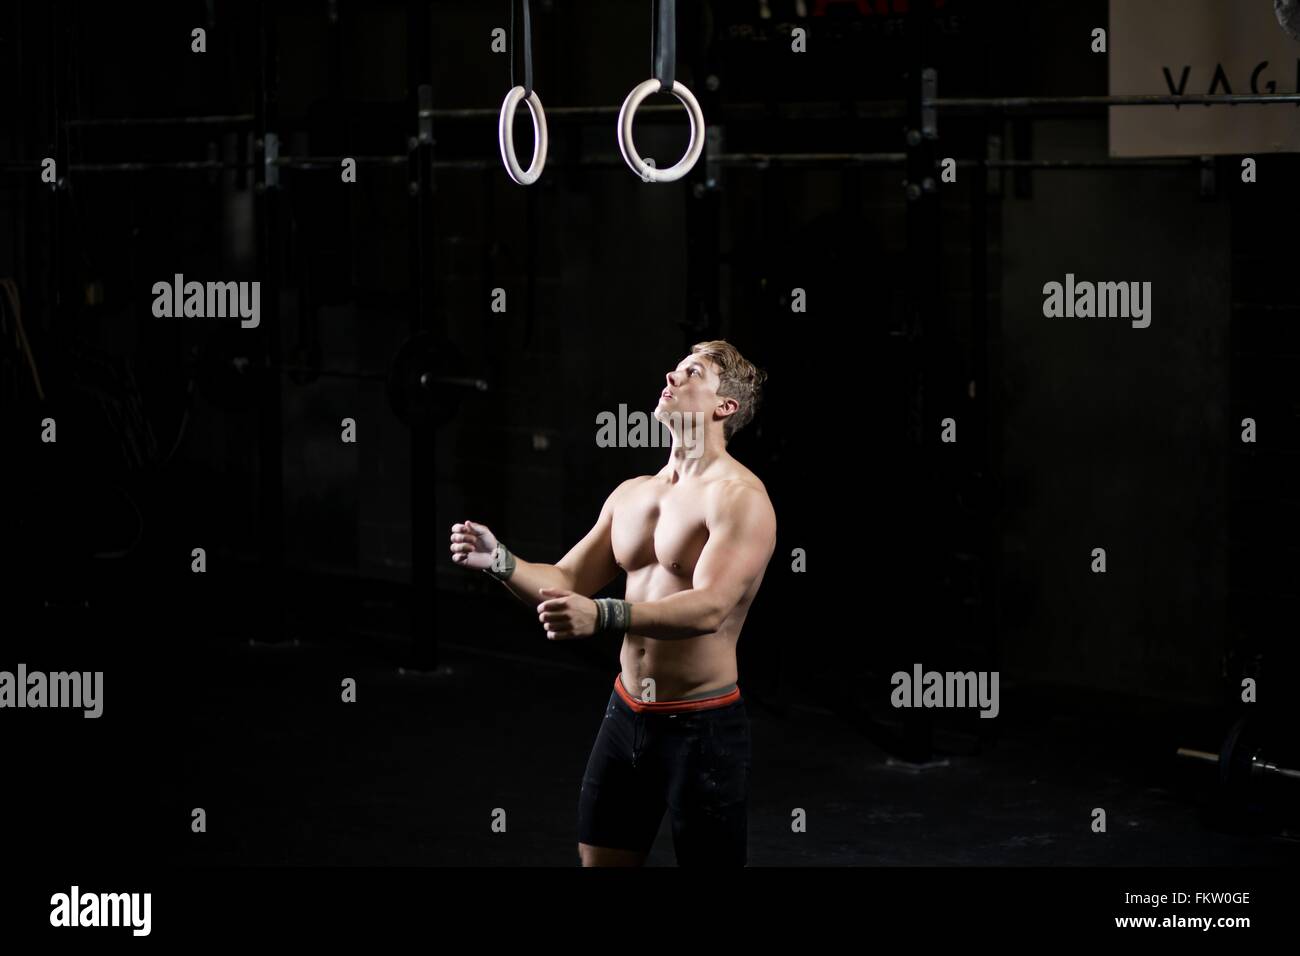 Bare chested young man preparing to use gym rings in dark gym Stock Photo